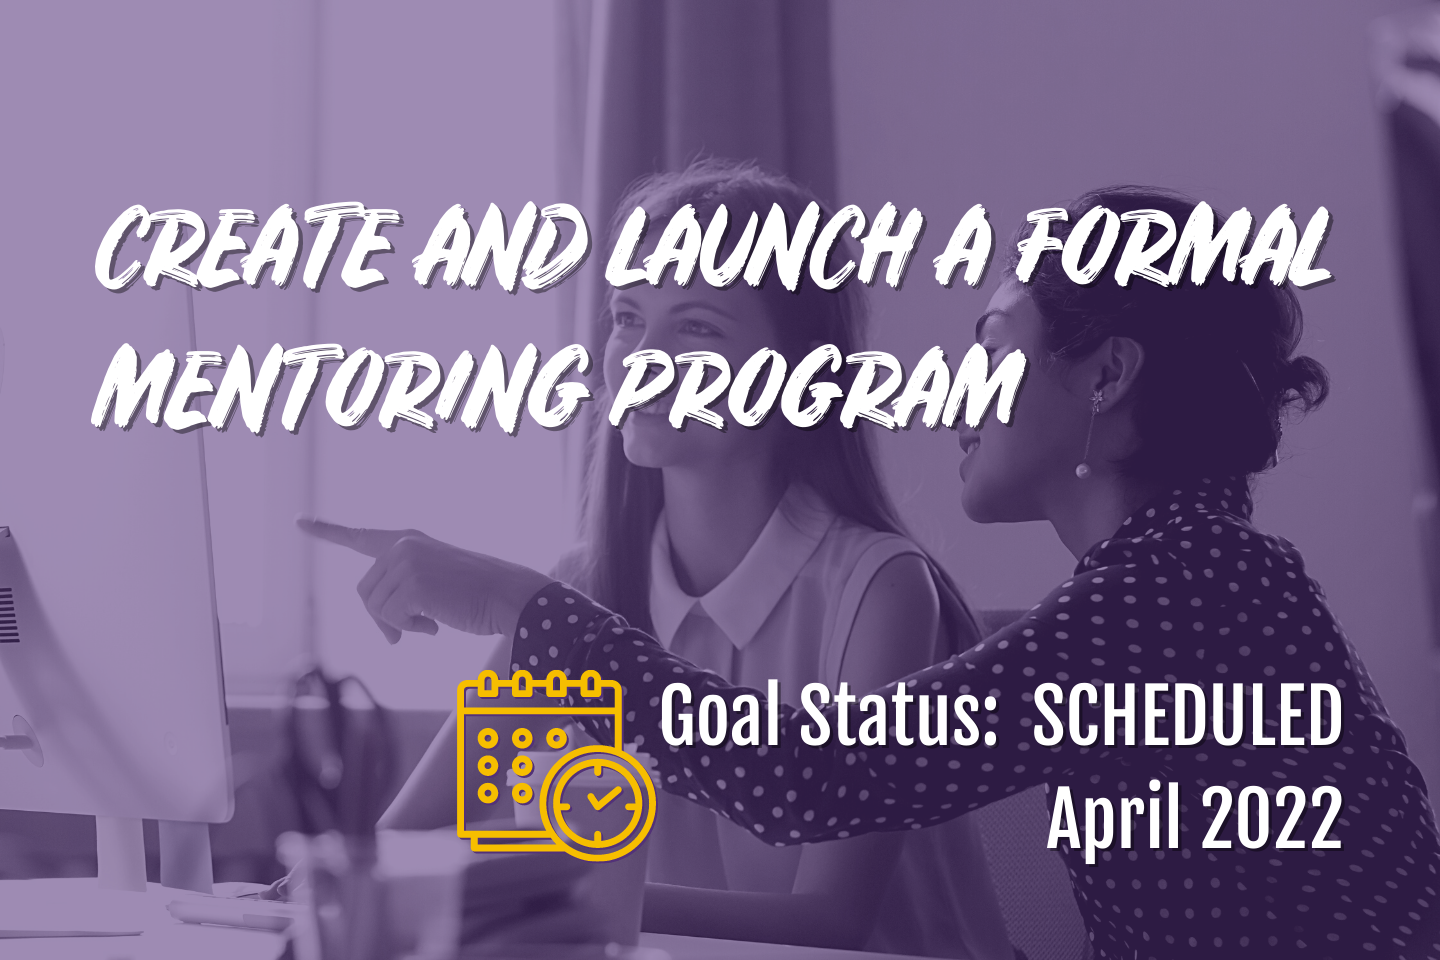 Create and launch a formal mentoring program